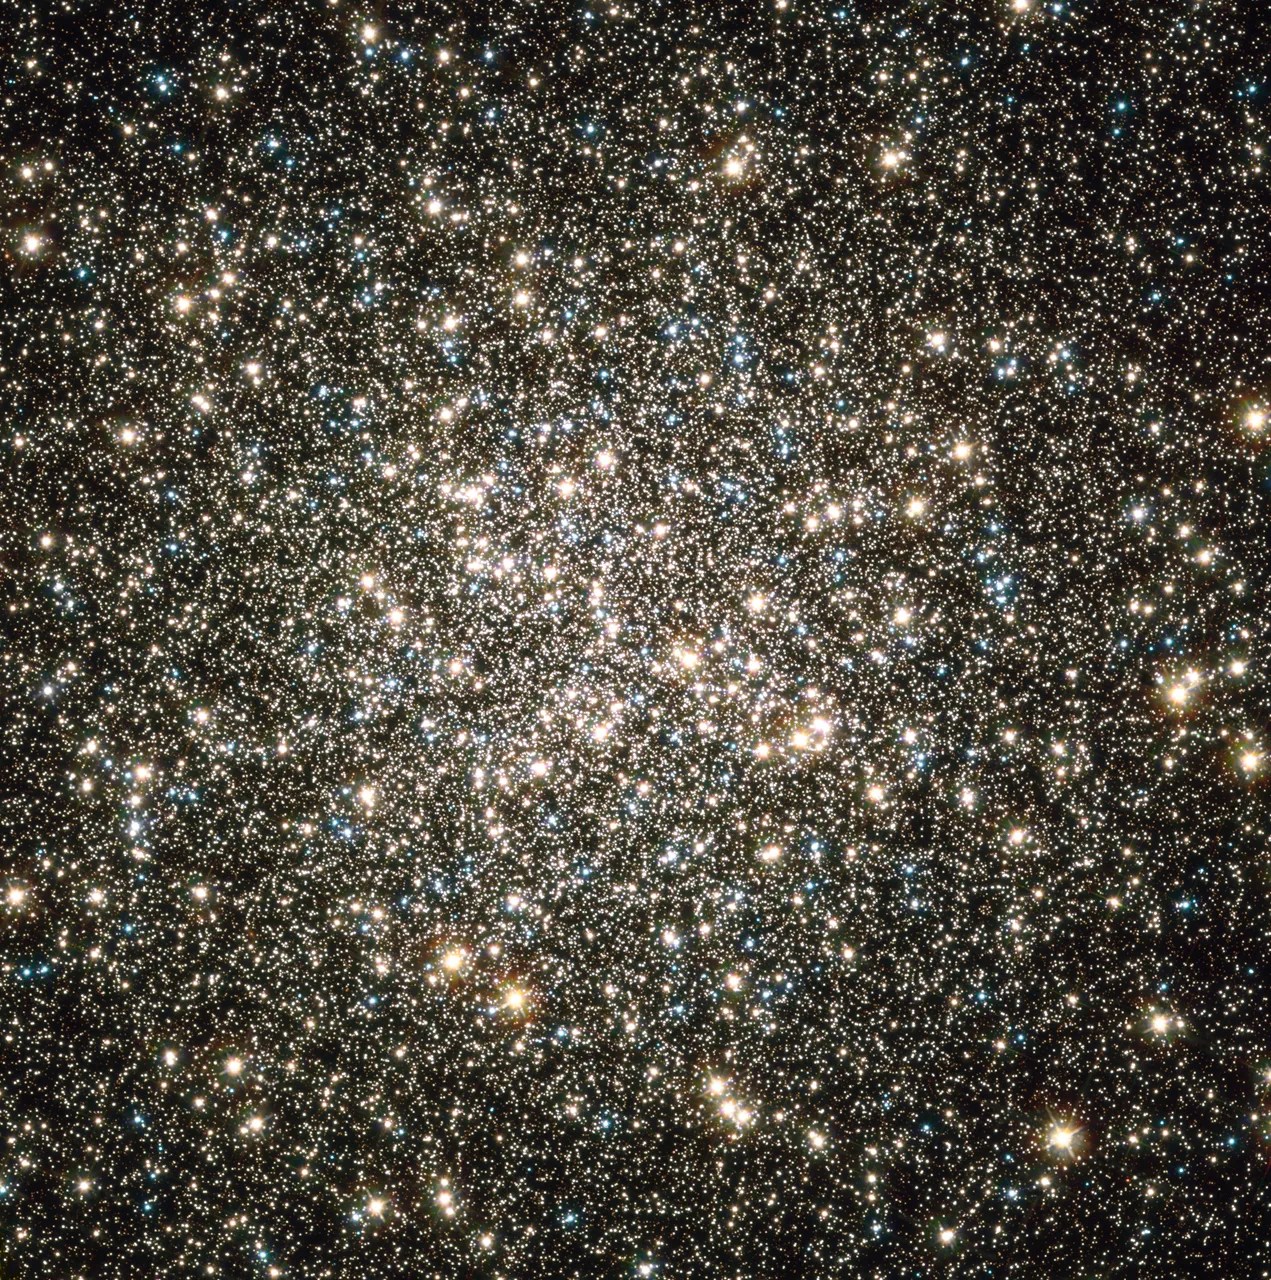 A globular cluster of thousands of stars, mainly white and yellow with small blue stars intermixed.